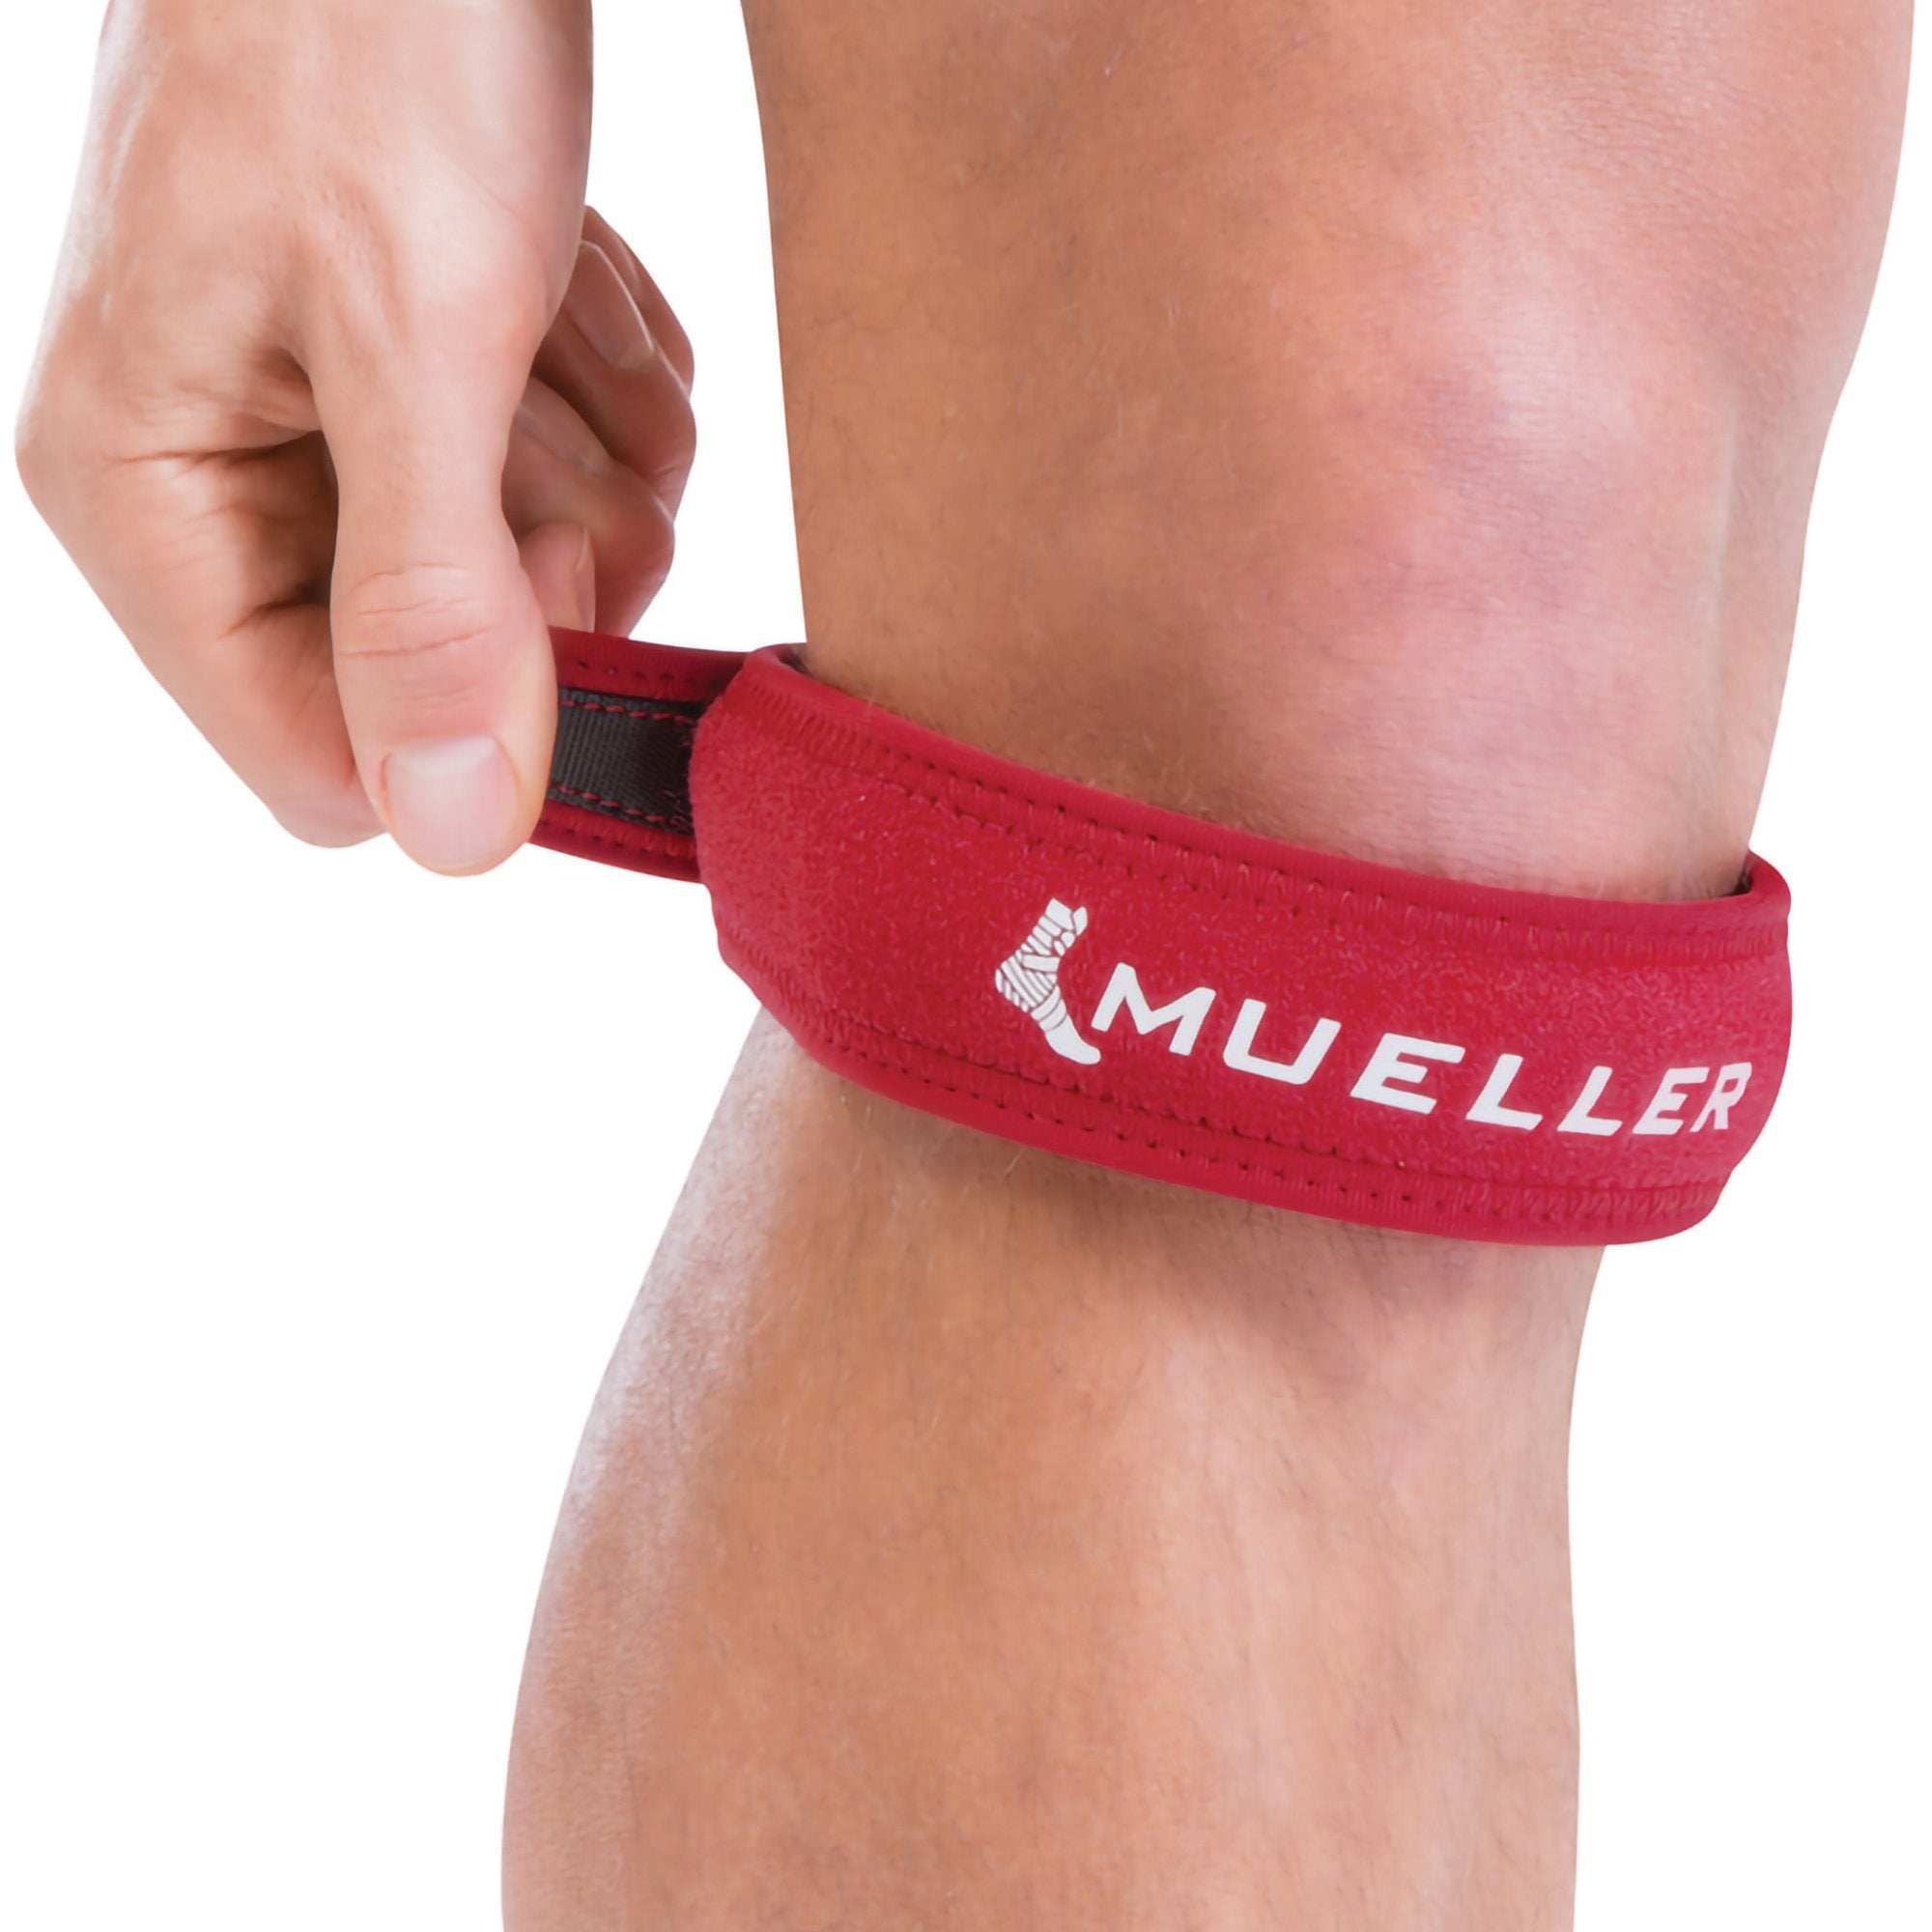 Knee Strap Jumper's Knee Strap One Size Fits Most 10 to 22 Inch Knee Circumference Left or Right Knee